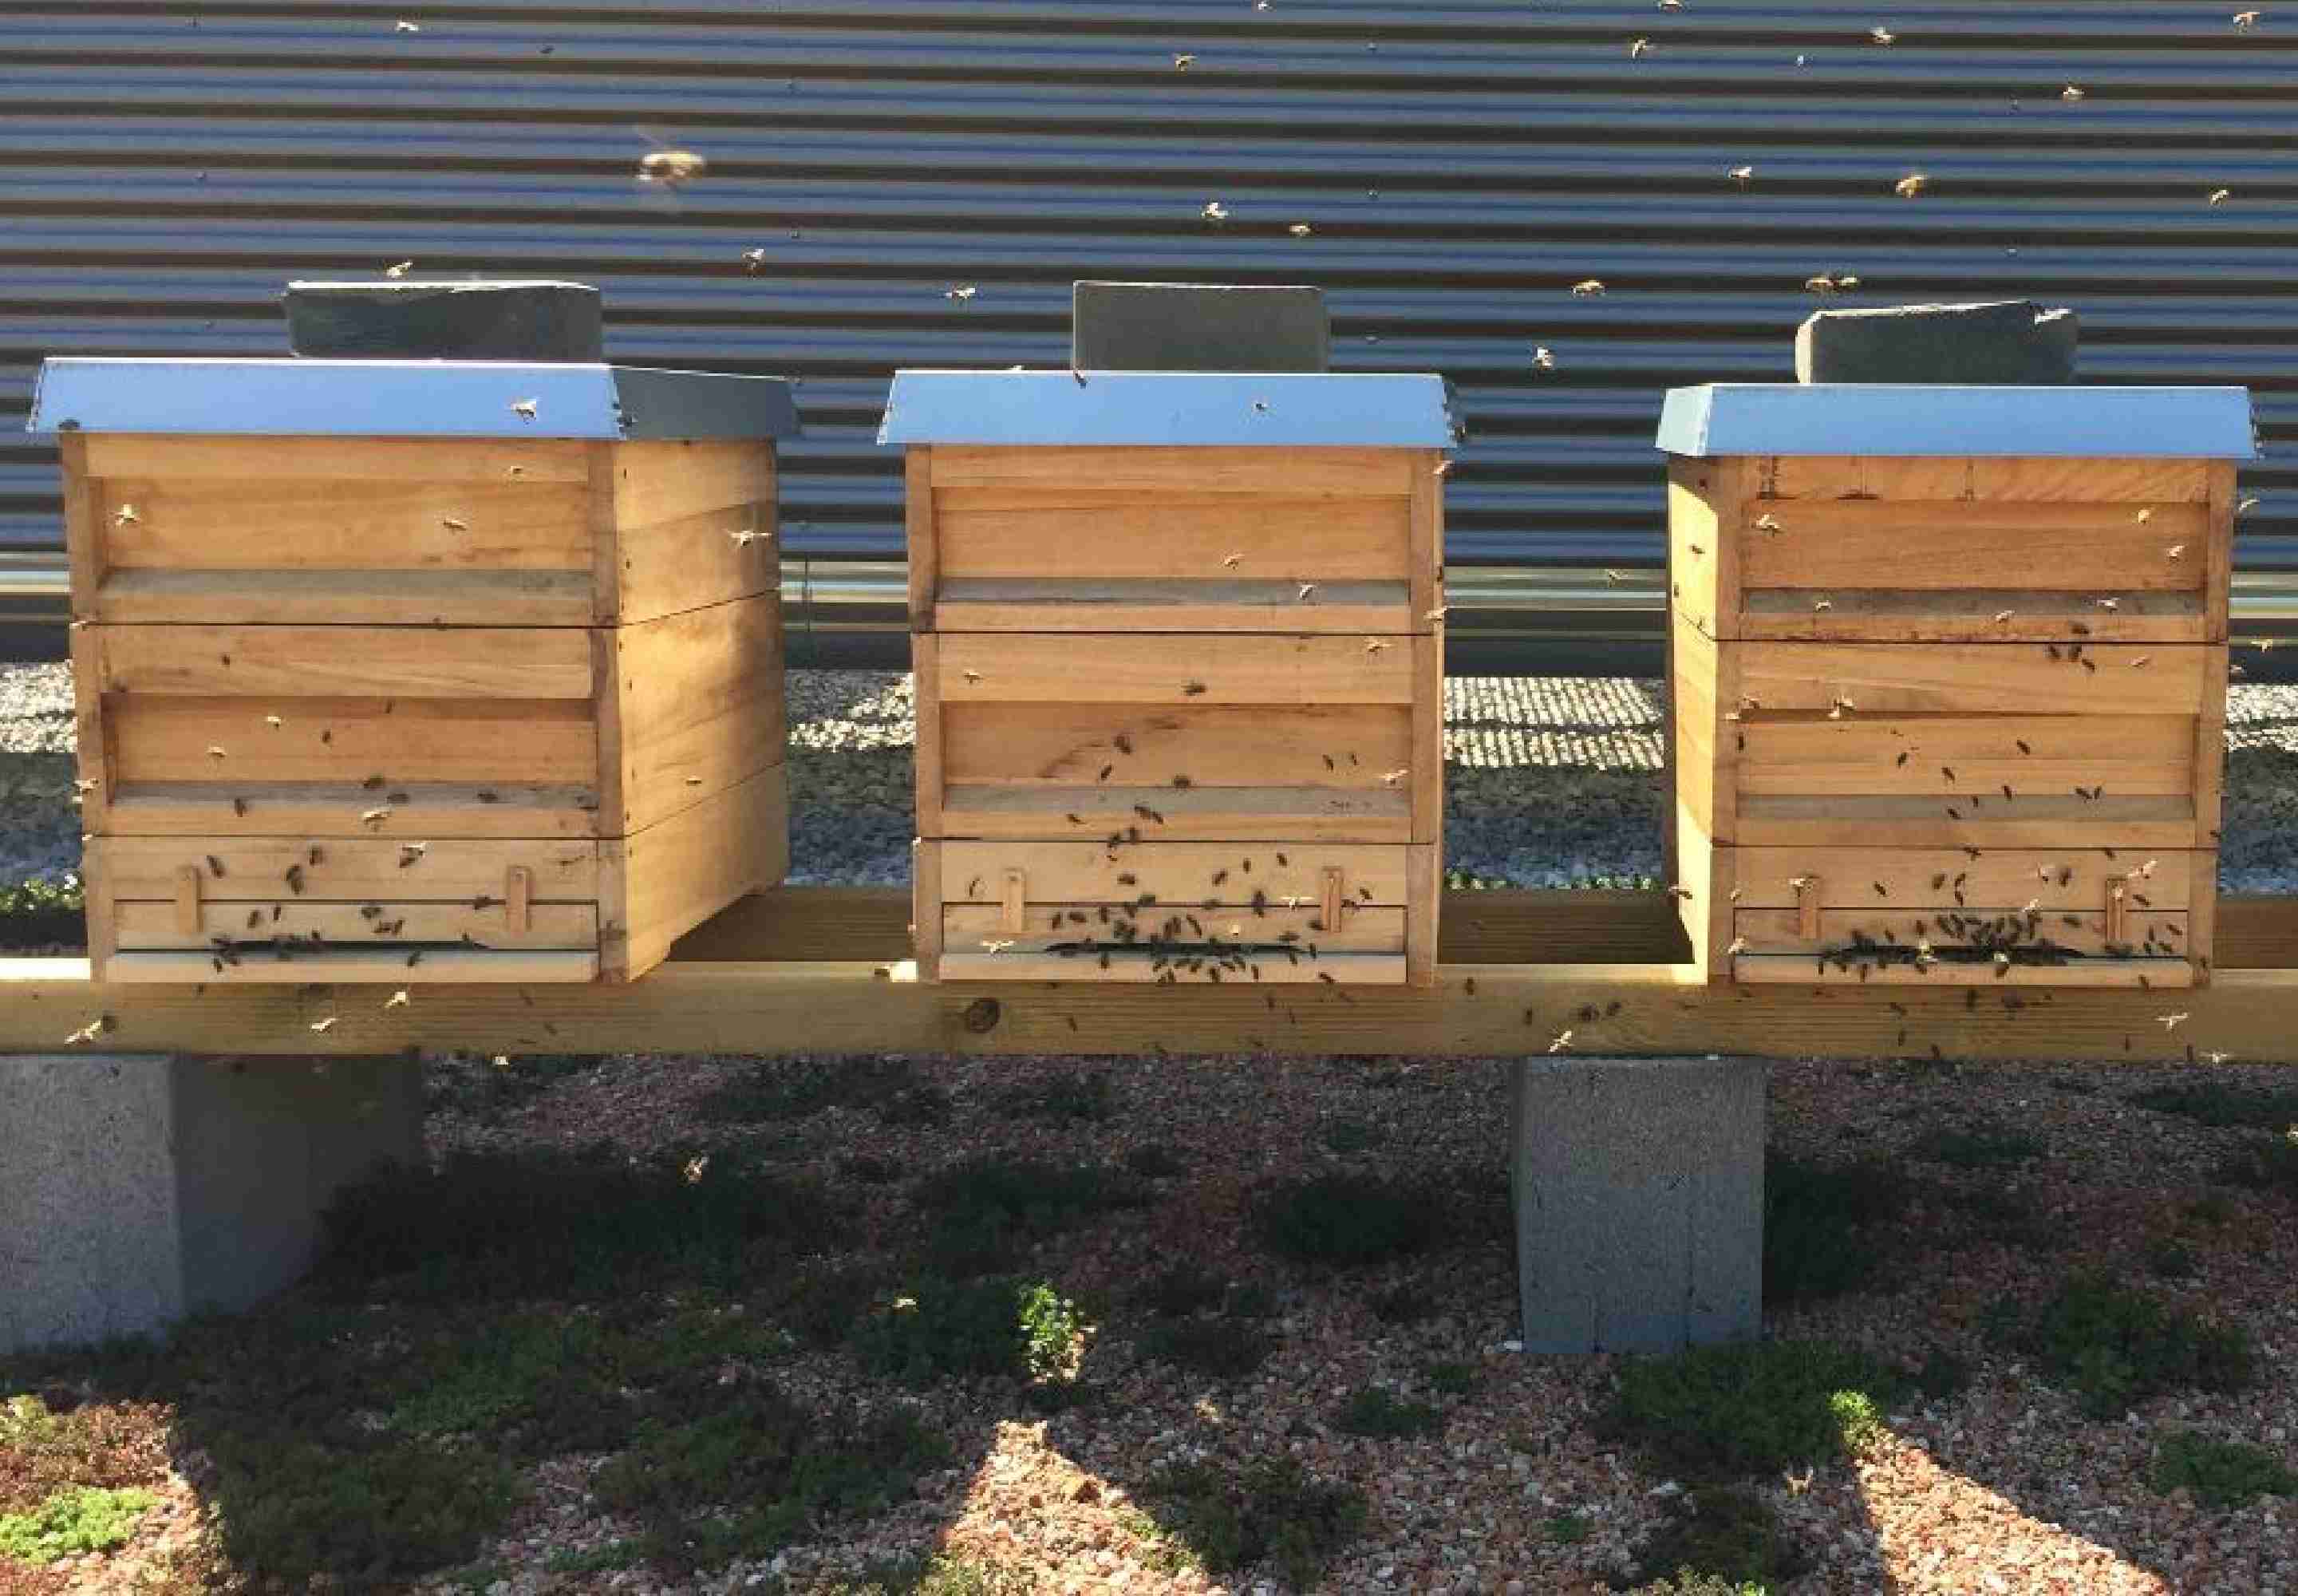 Bees at the back of a wooden box